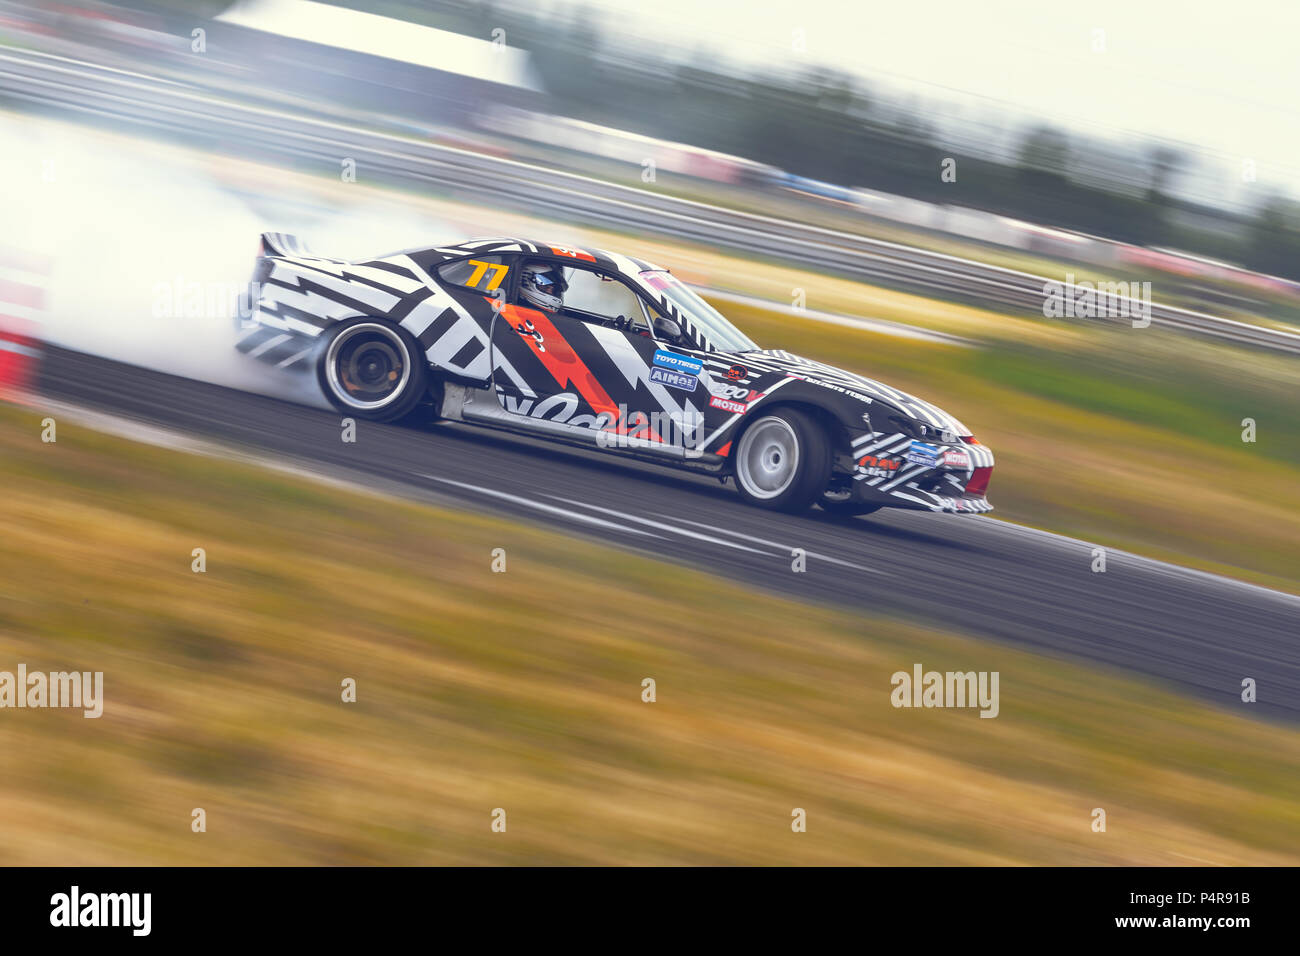 AutodromSpb, Saint-Petersburg, Russia - August 15, 2018: Powerful race car drifting on speed track during First Stage of Russian Drift Series West Stock Photo